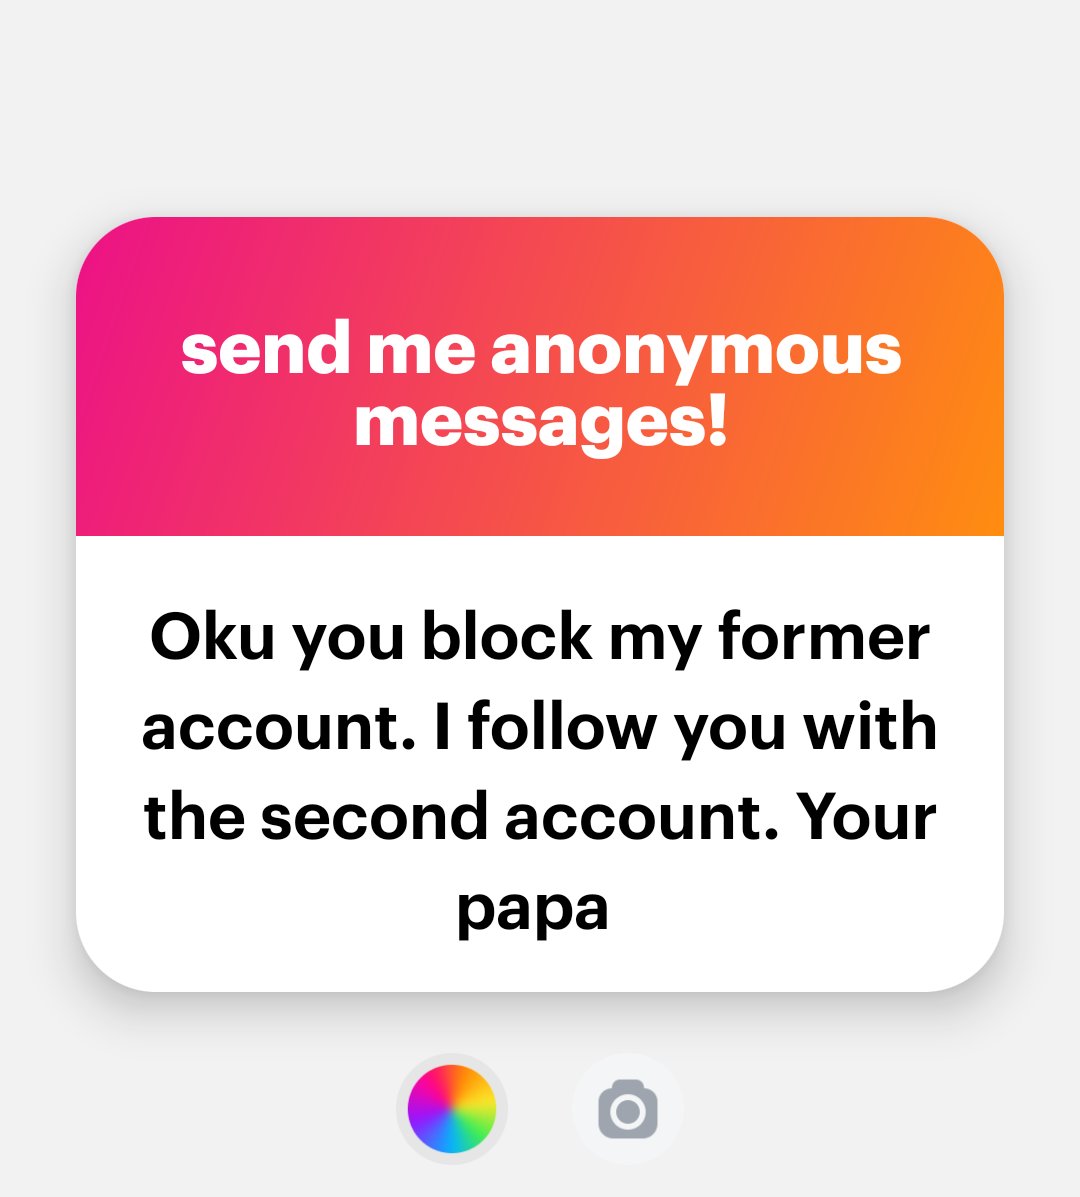 Wetin be the second account? I want DM you